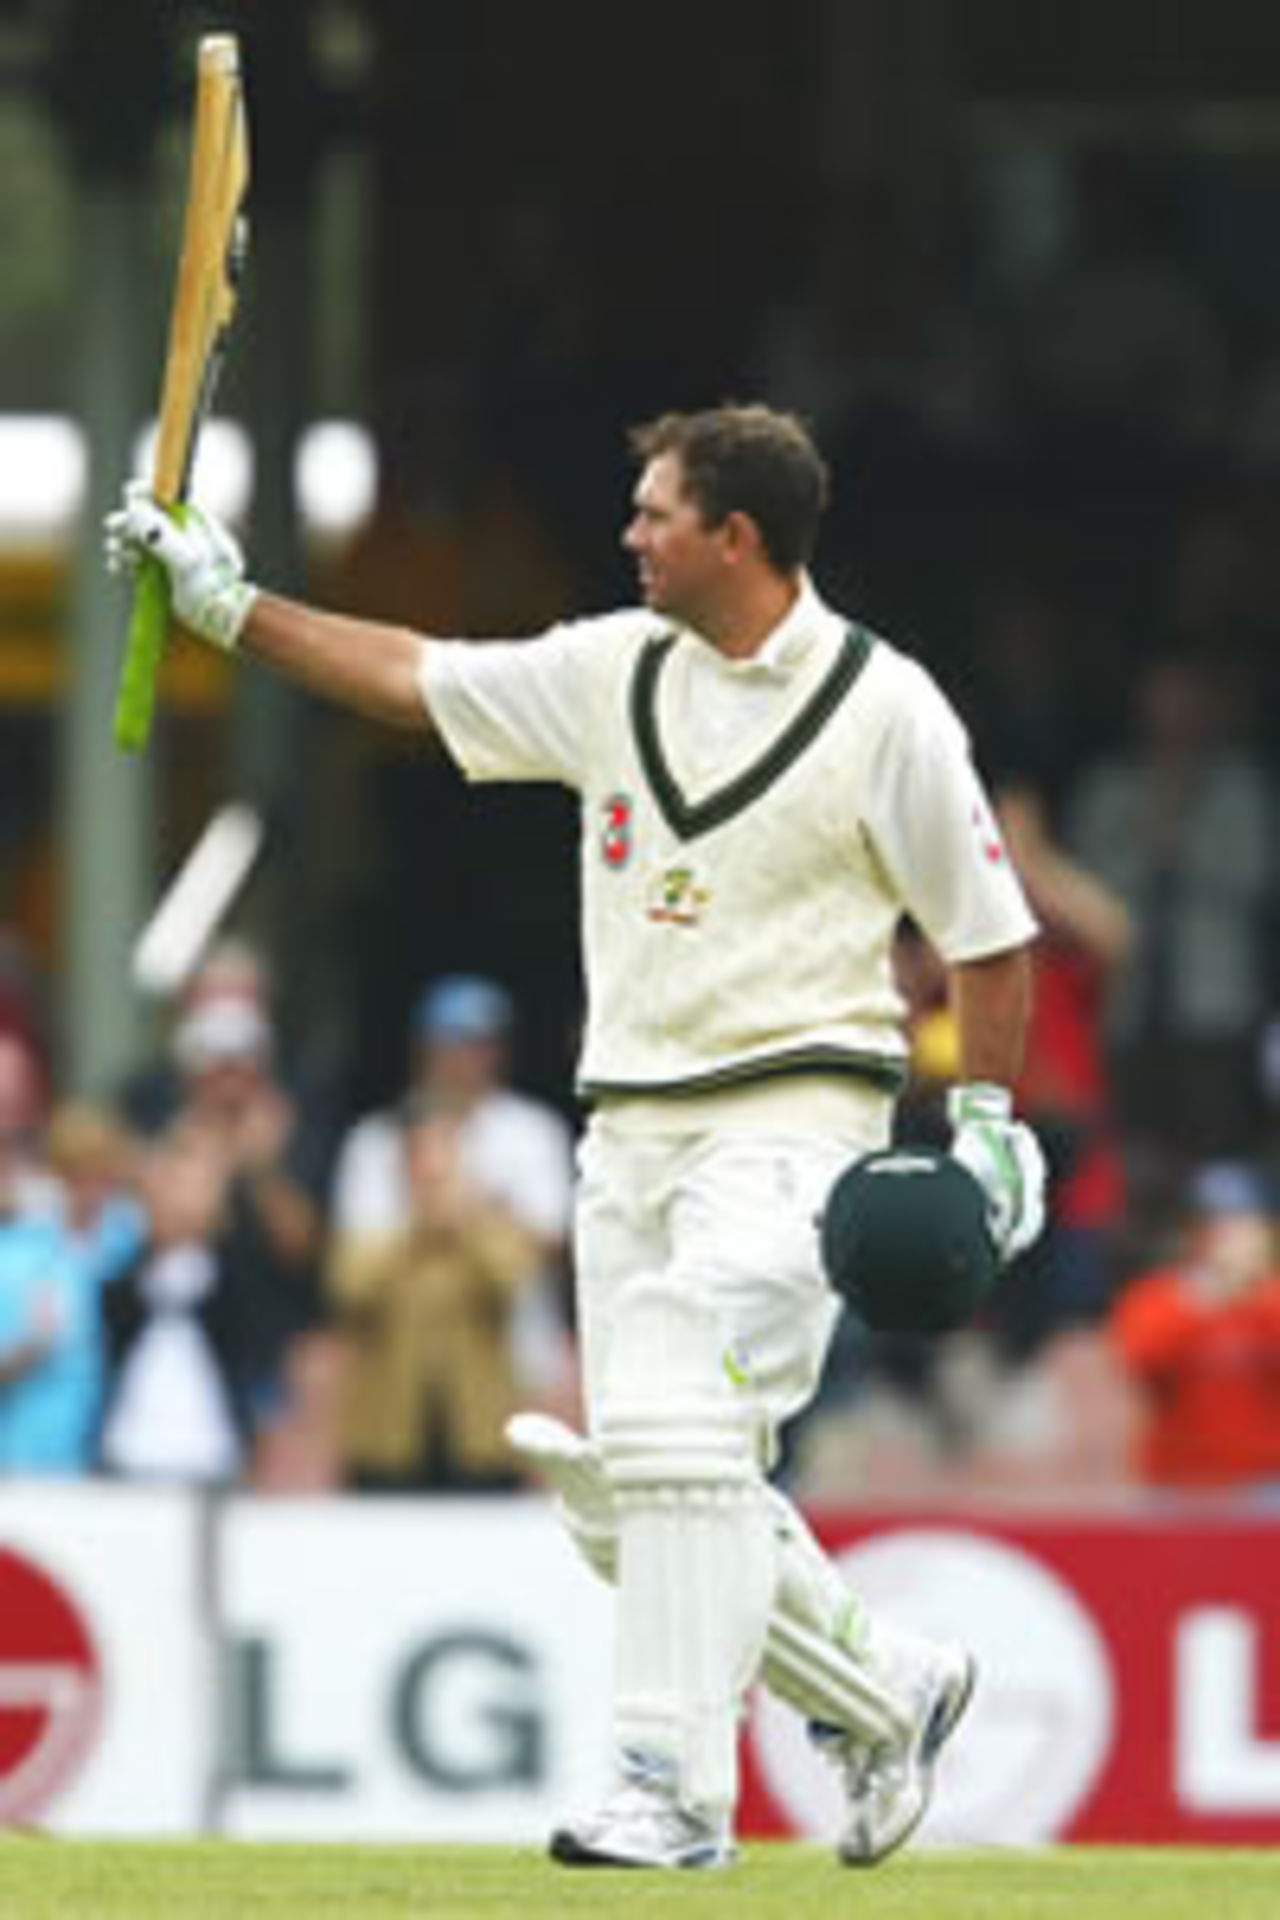 Ricky Ponting of Australia reaches 100 during day two of the 2nd Test between Australia and Zimbabwe played at the SCG on October 18, 2003 in Sydney, Australia.